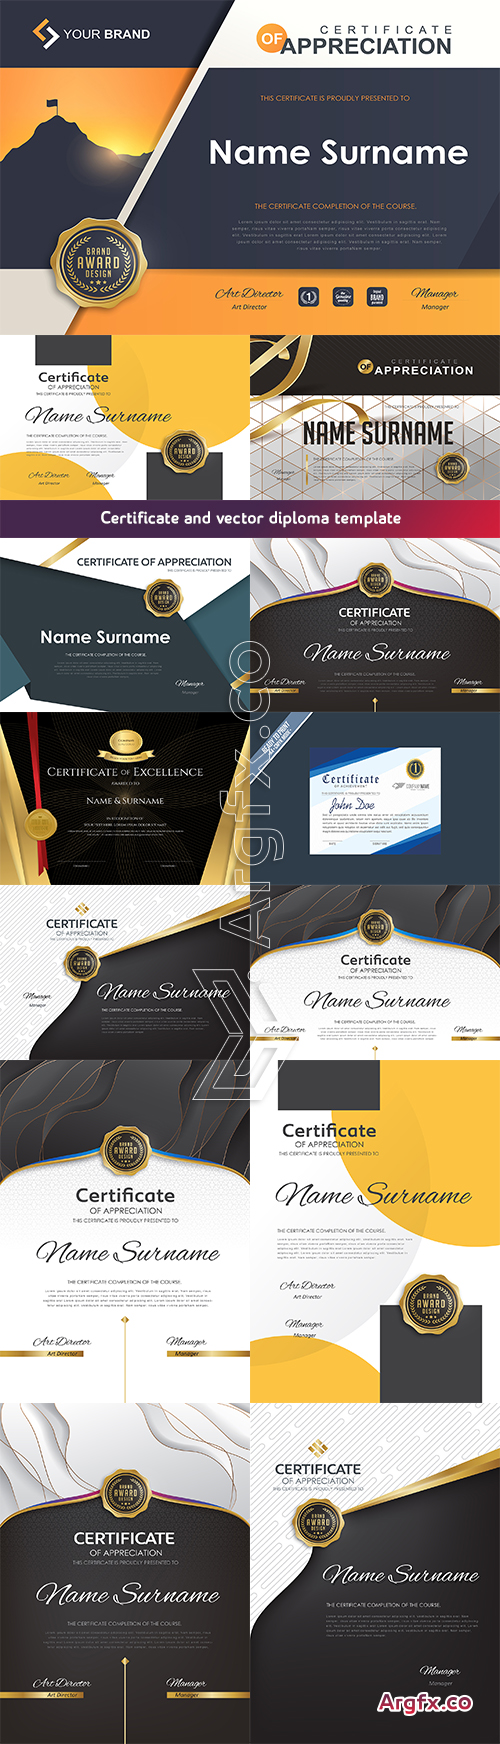  Certificate and vector diploma template design set